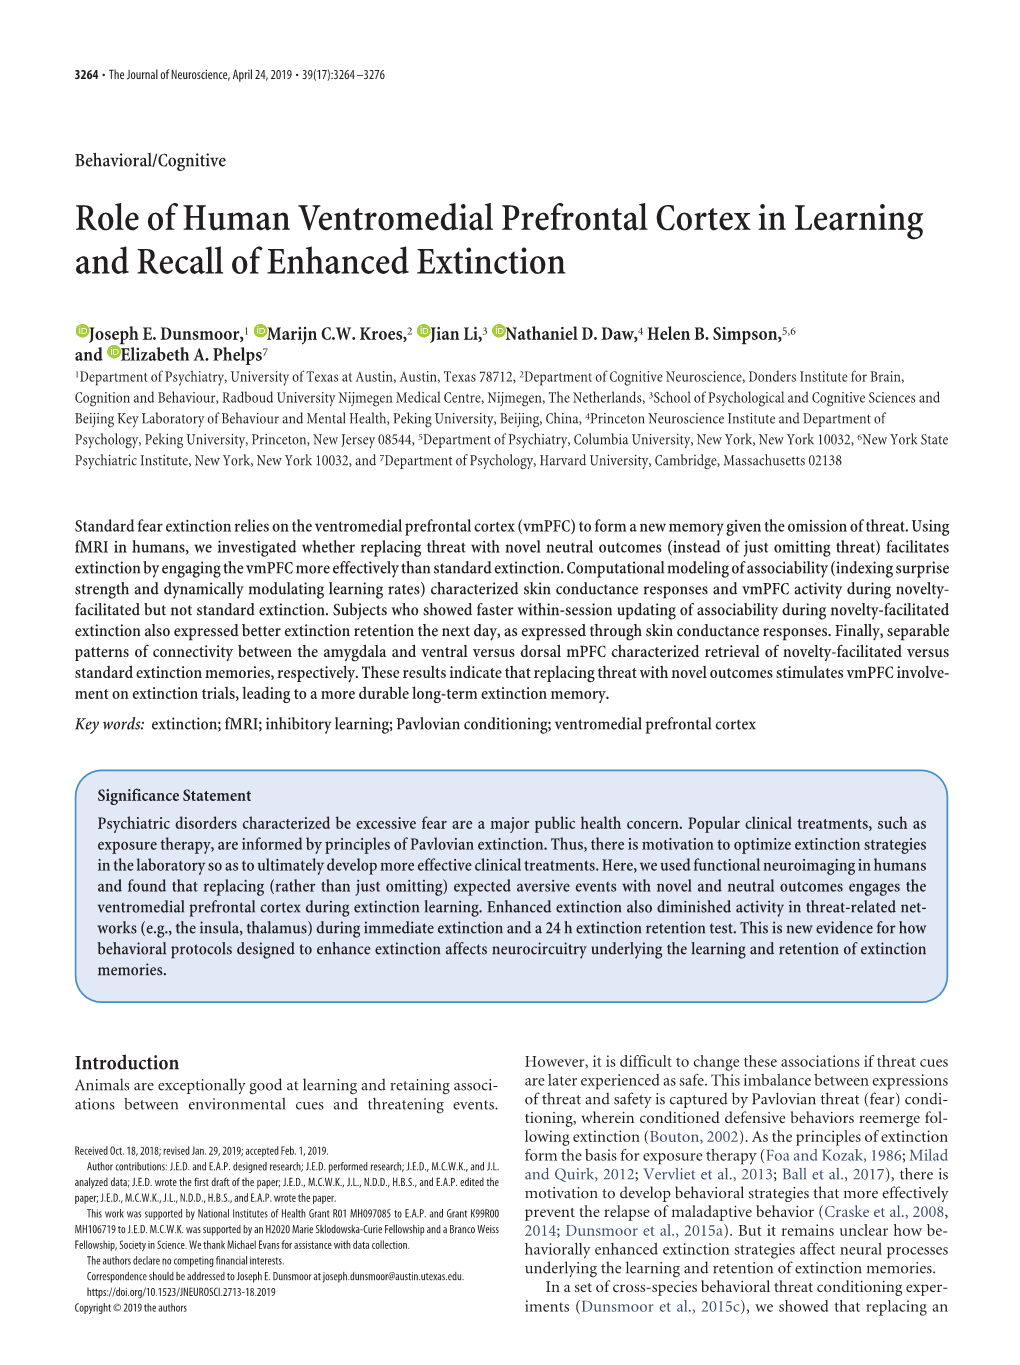 Role of Human Ventromedial Prefrontal Cortex in Learning and Recall of Enhanced Extinction